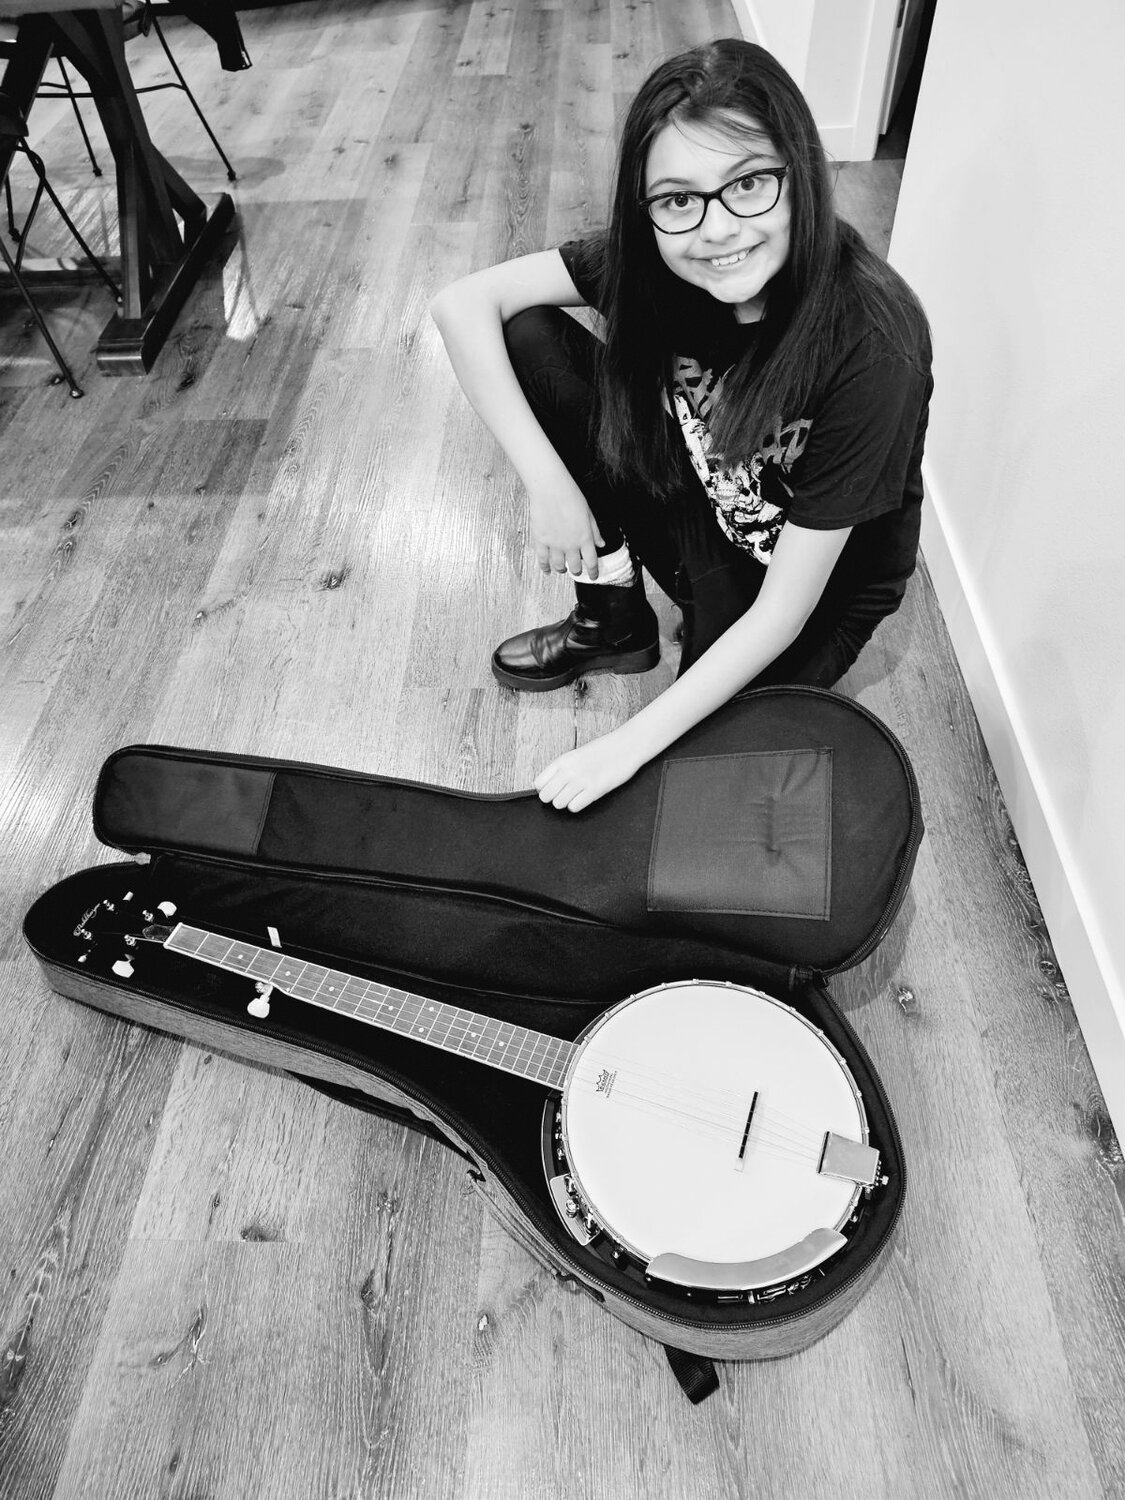 Sofia Lopez with her banjo. Lopez takes weekly banjo lessons from Bob Goodwin.